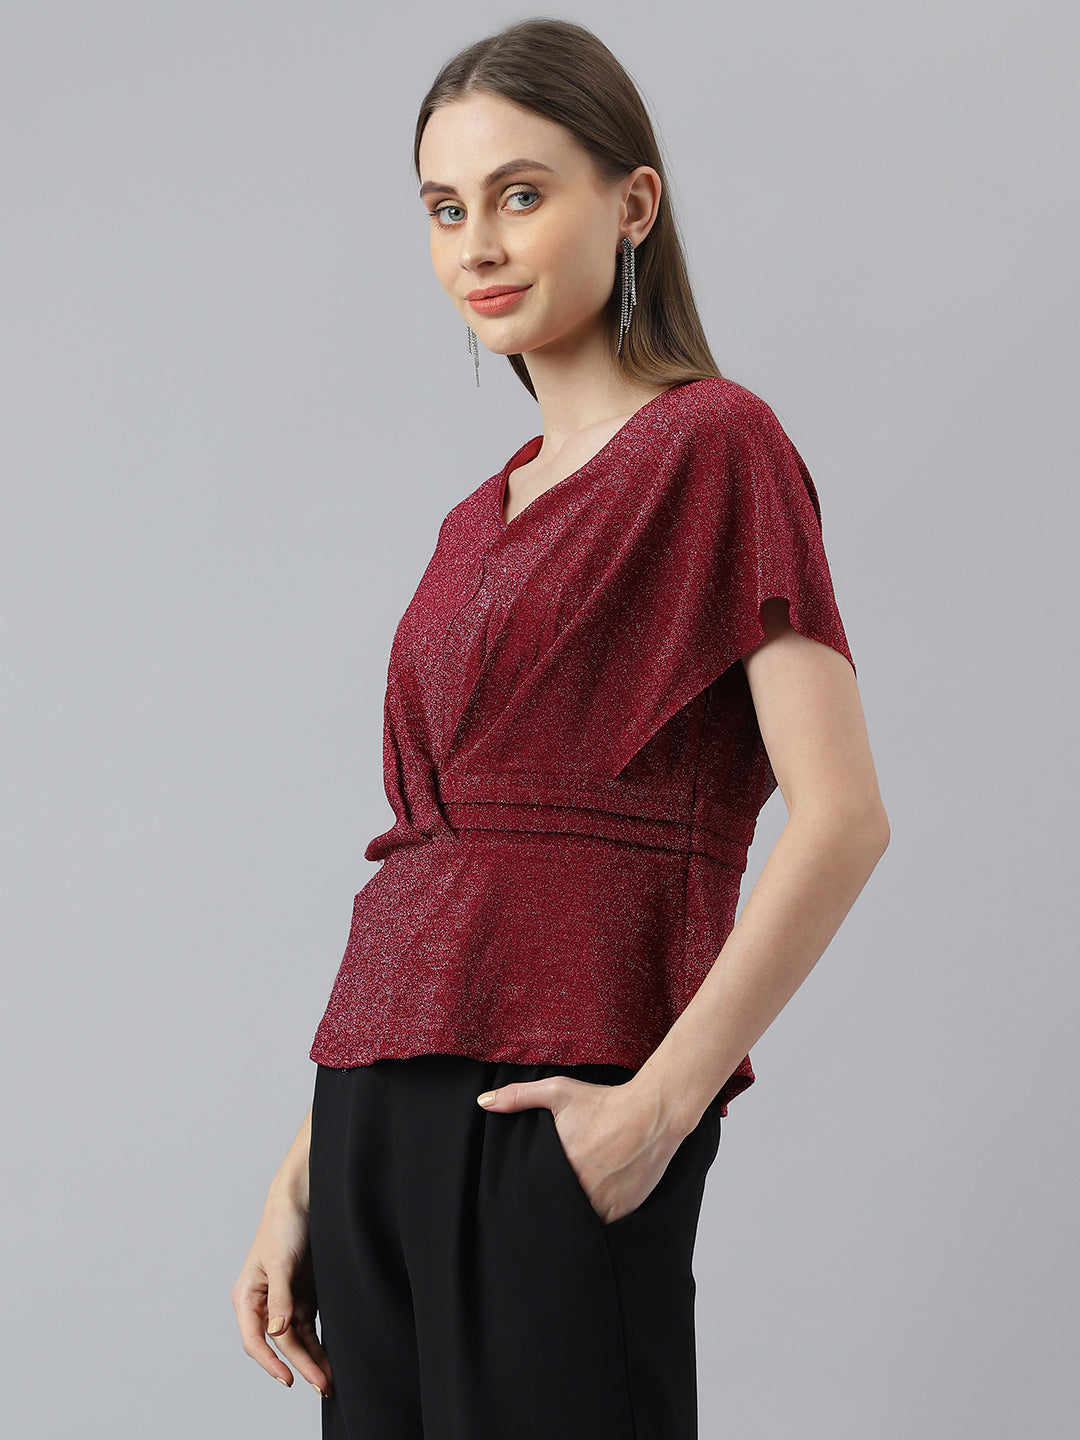 Red Half Sleeve Normal Knit Top